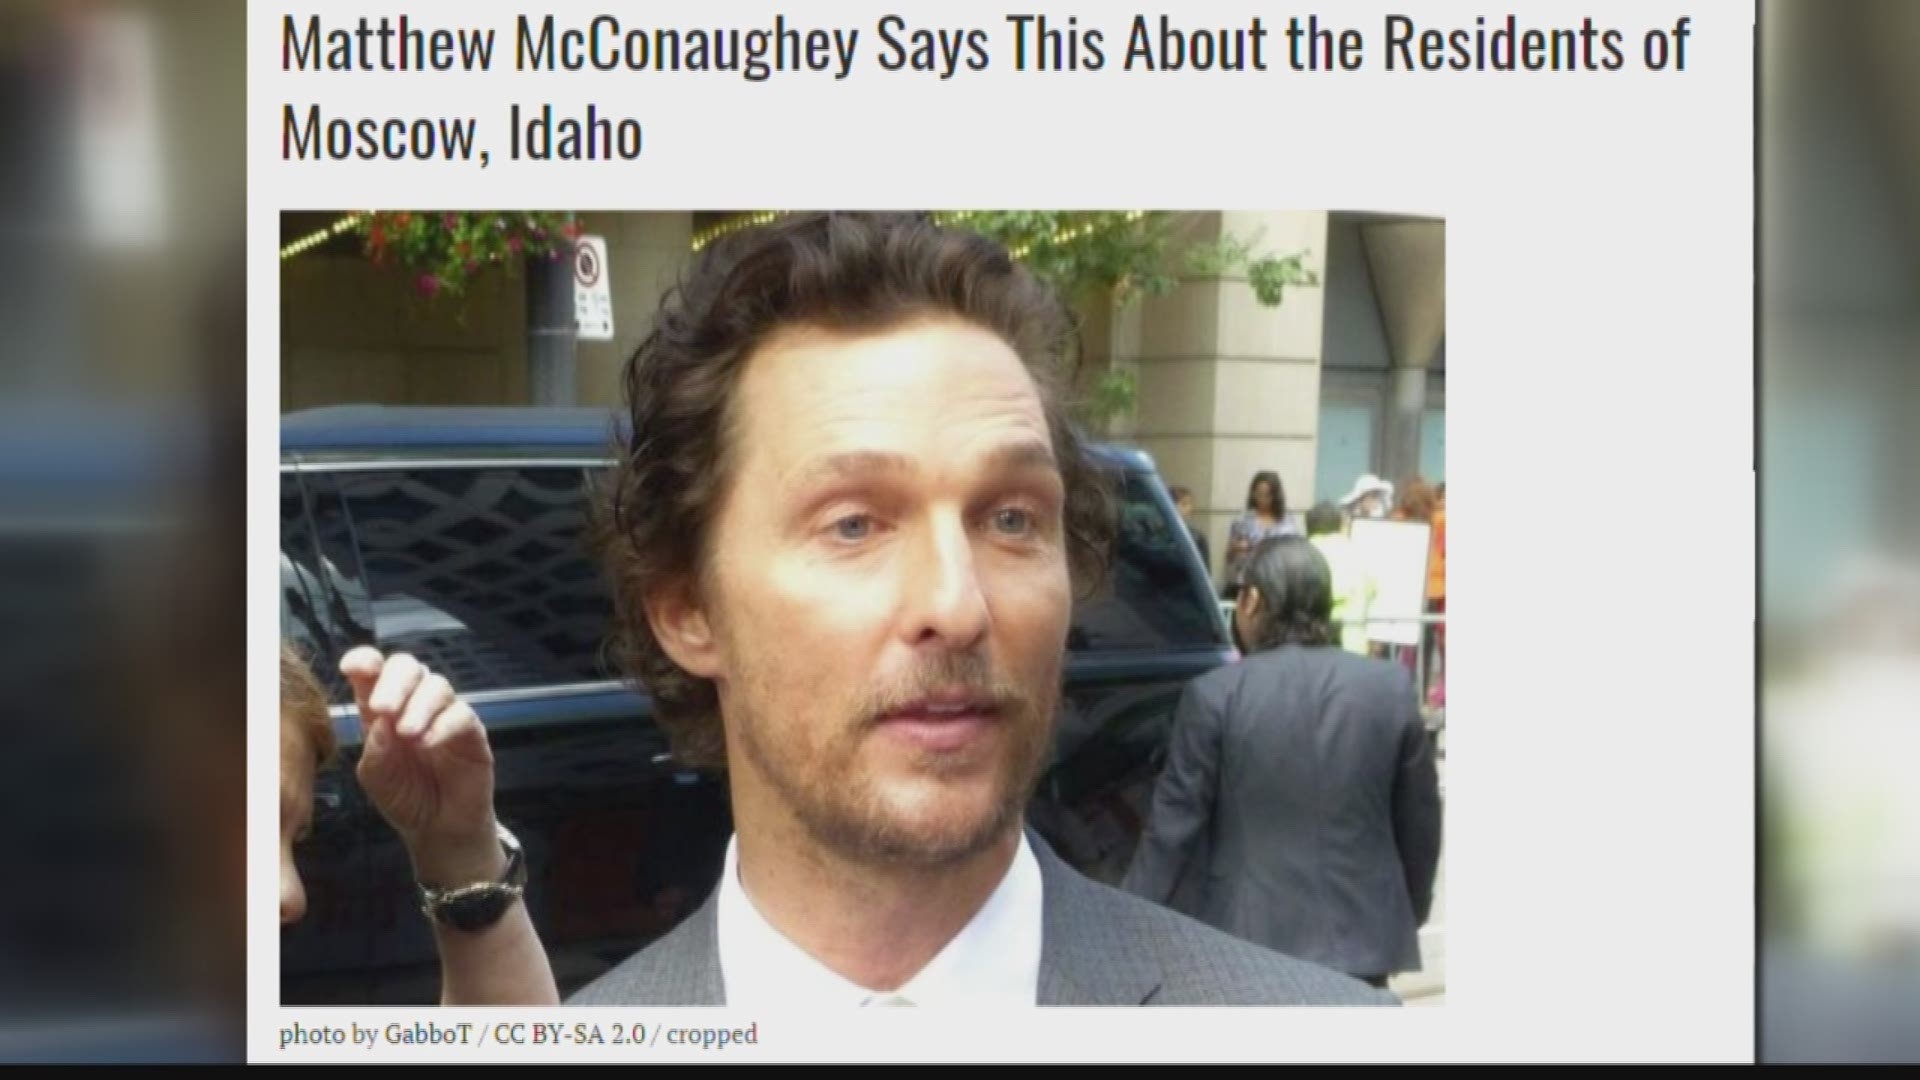 We checked to see if Mcconaughey was actually in Moscow today.